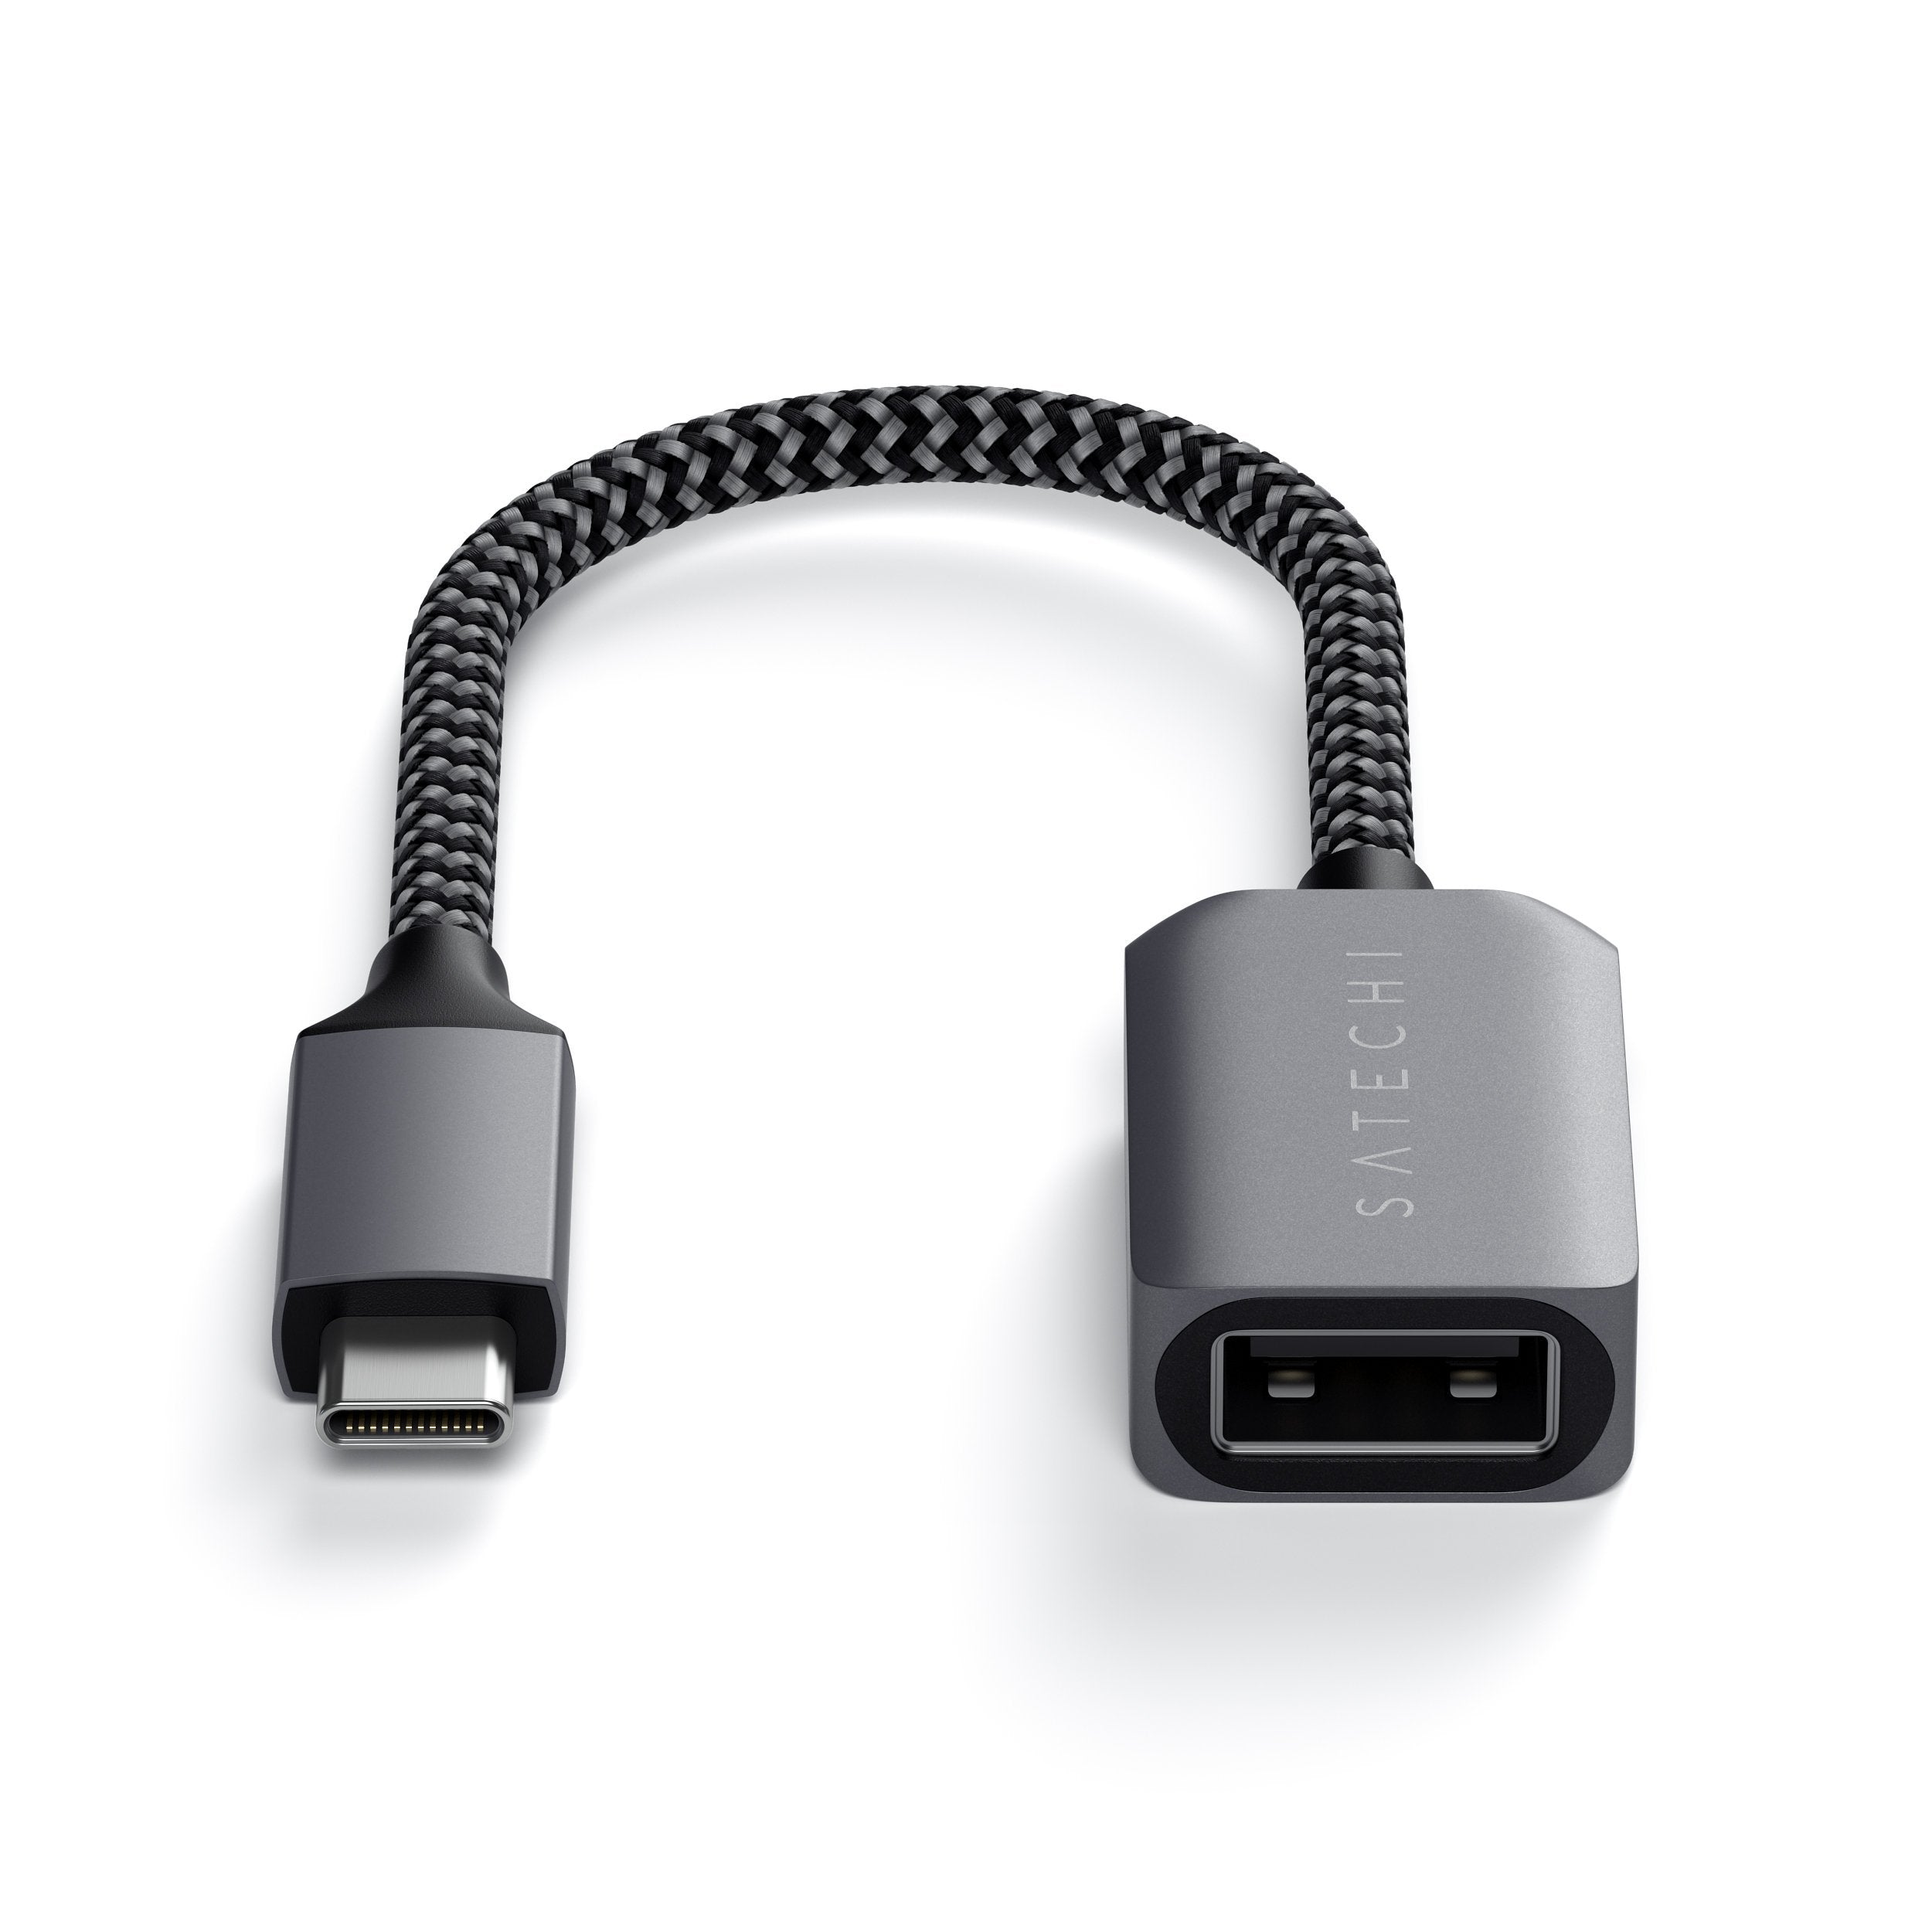 USB-C to USB 3.0 Adapter Cable - Satechi